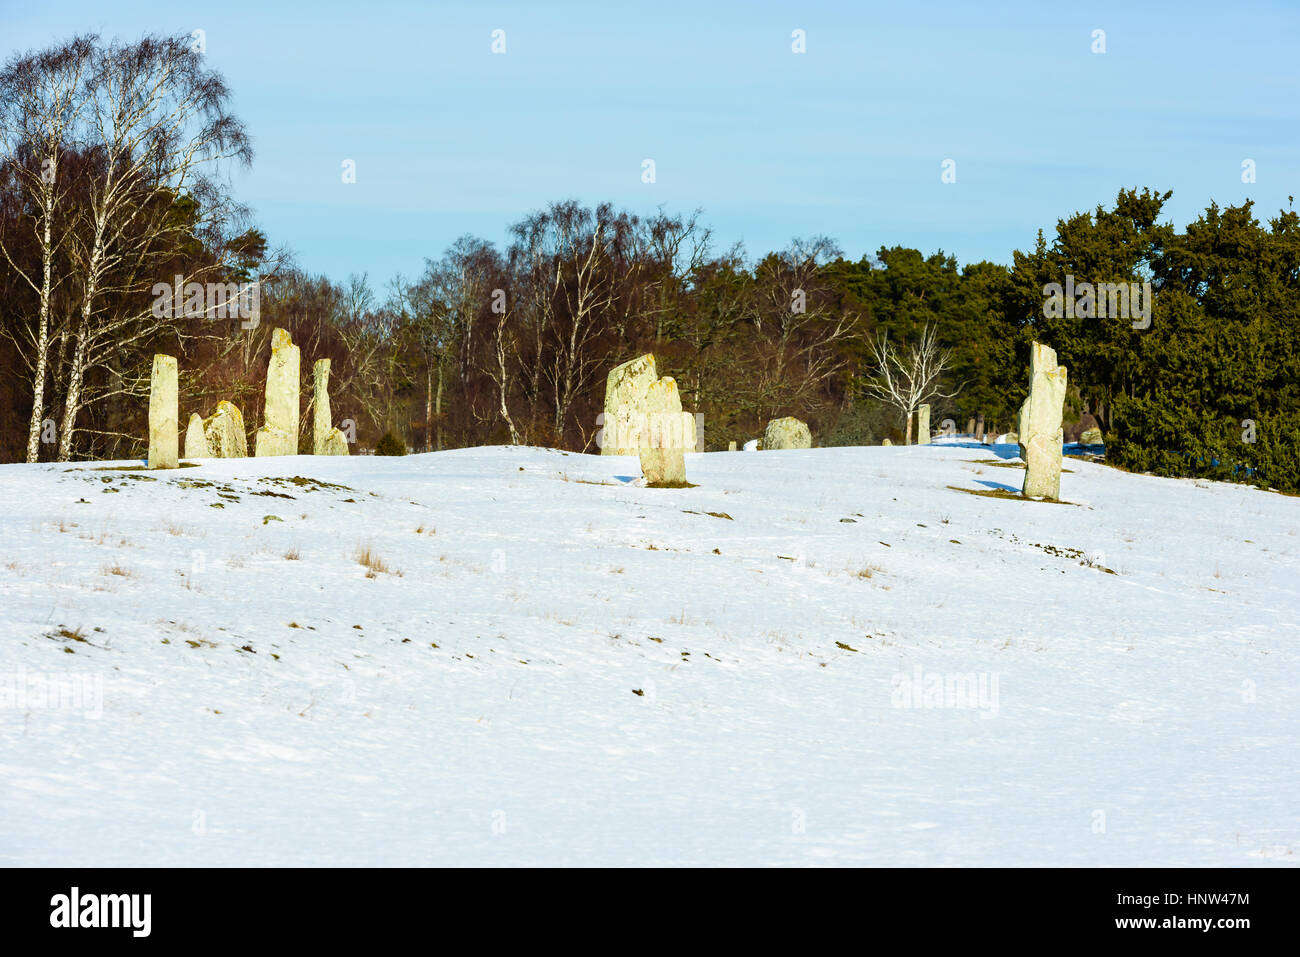 Ancient burial ground with standing stones and lots of mounds in winter landscape. Location Hjortahammar in Blekinge, Sweden. Stock Photo